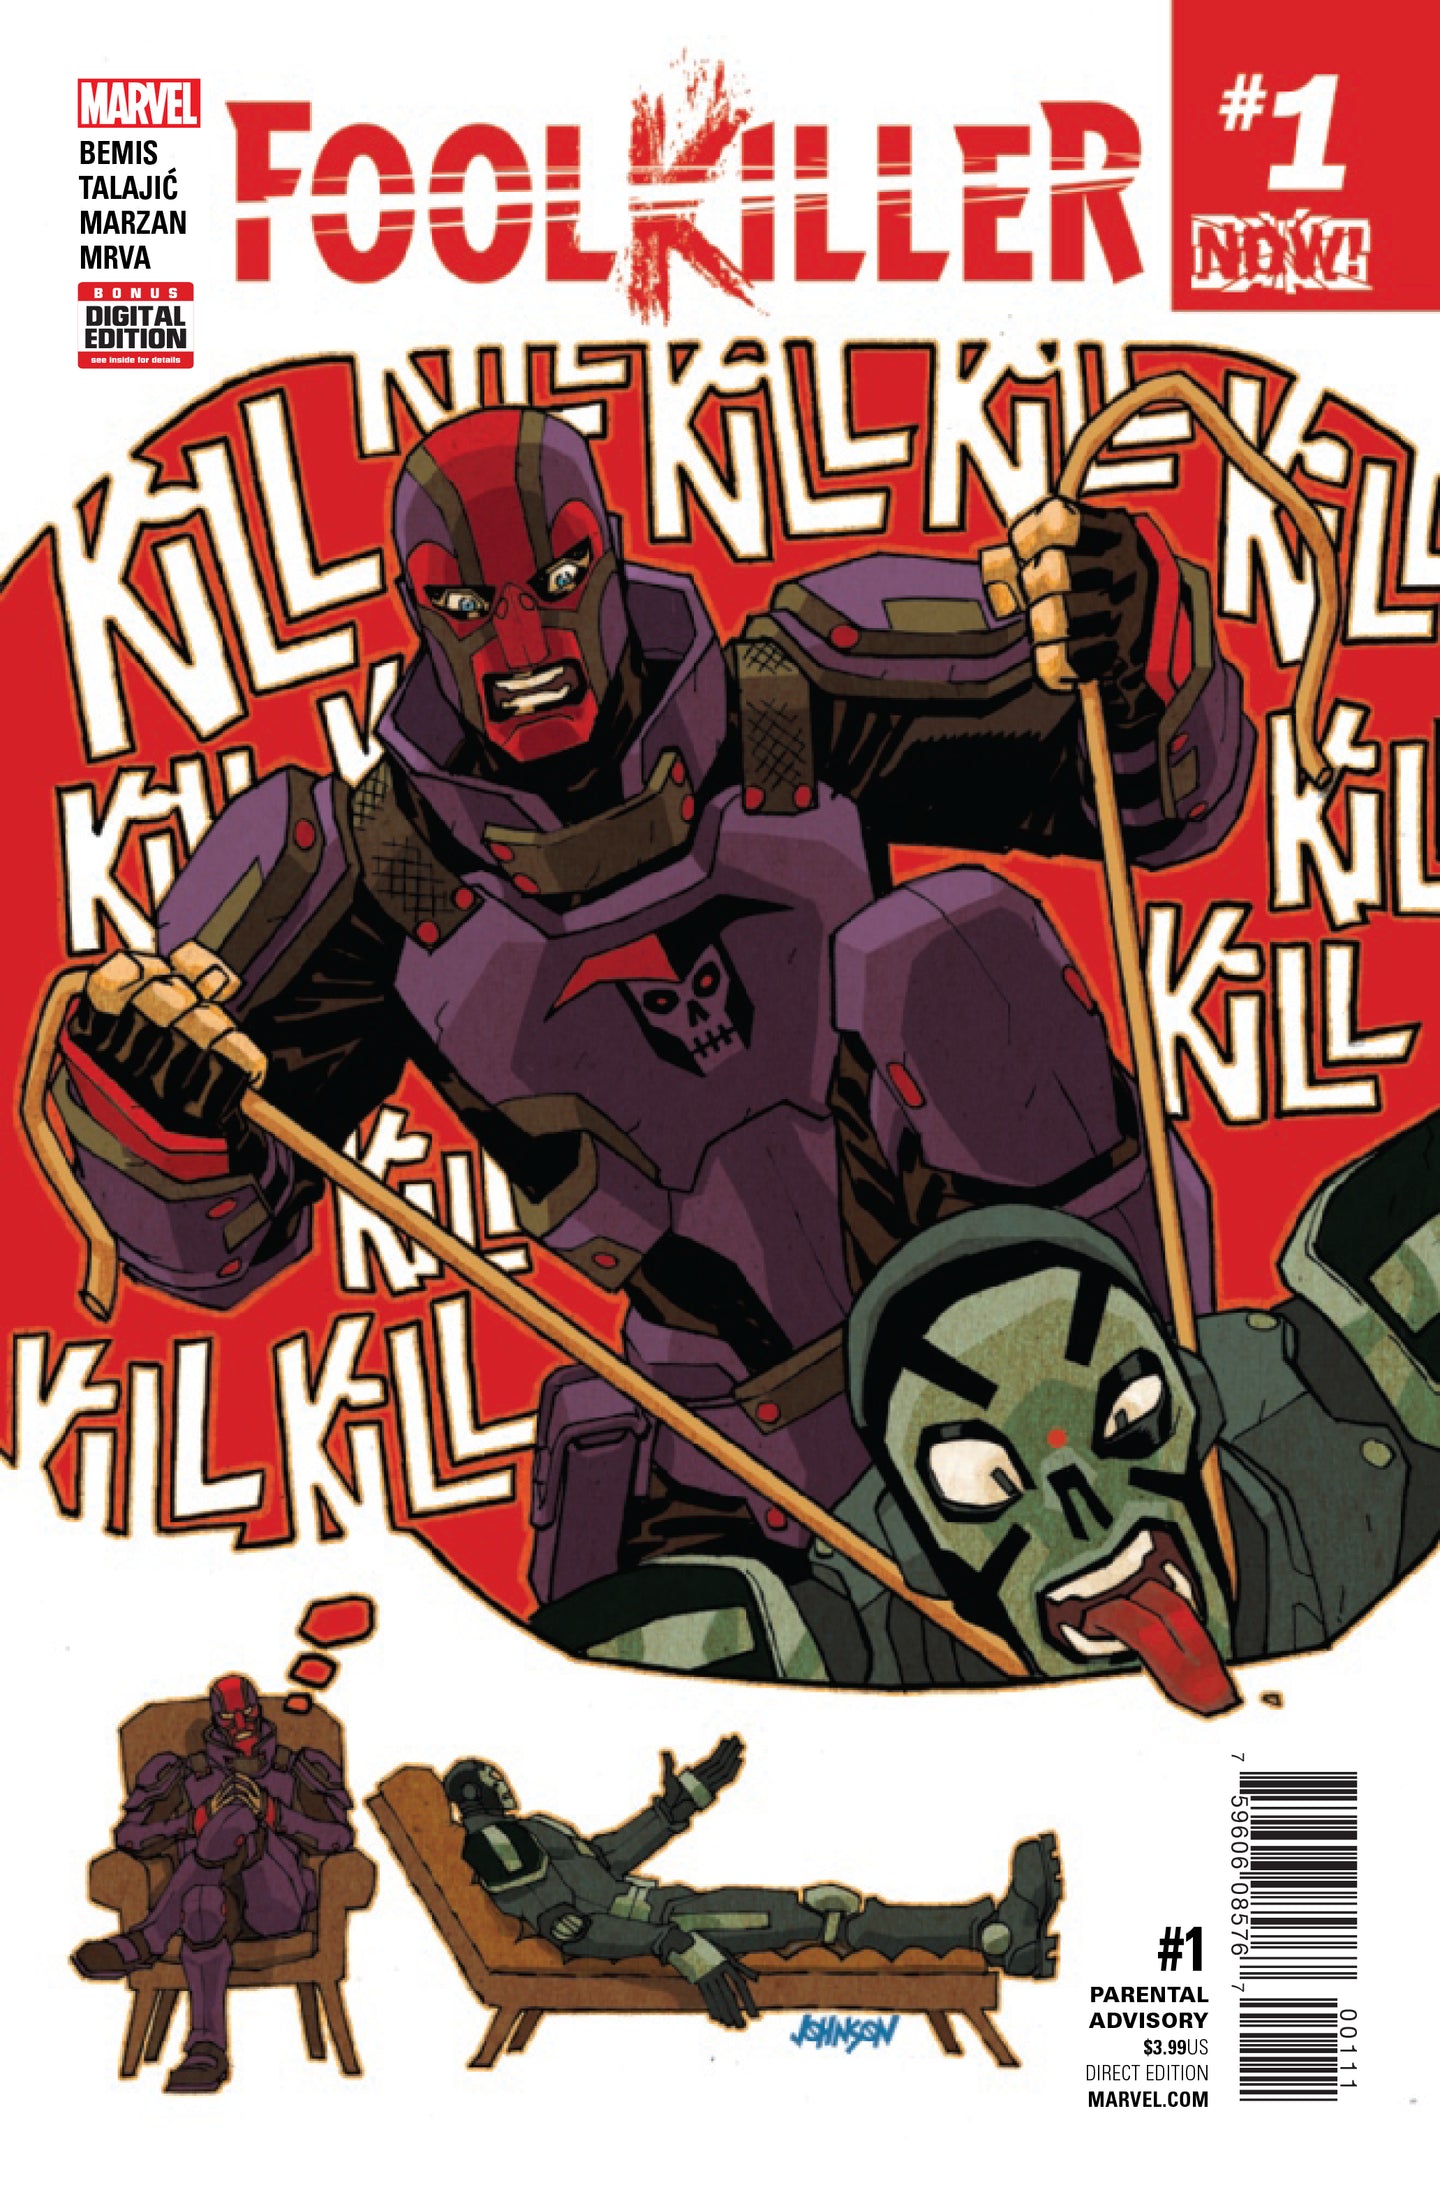 FOOLKILLER #1 NOW